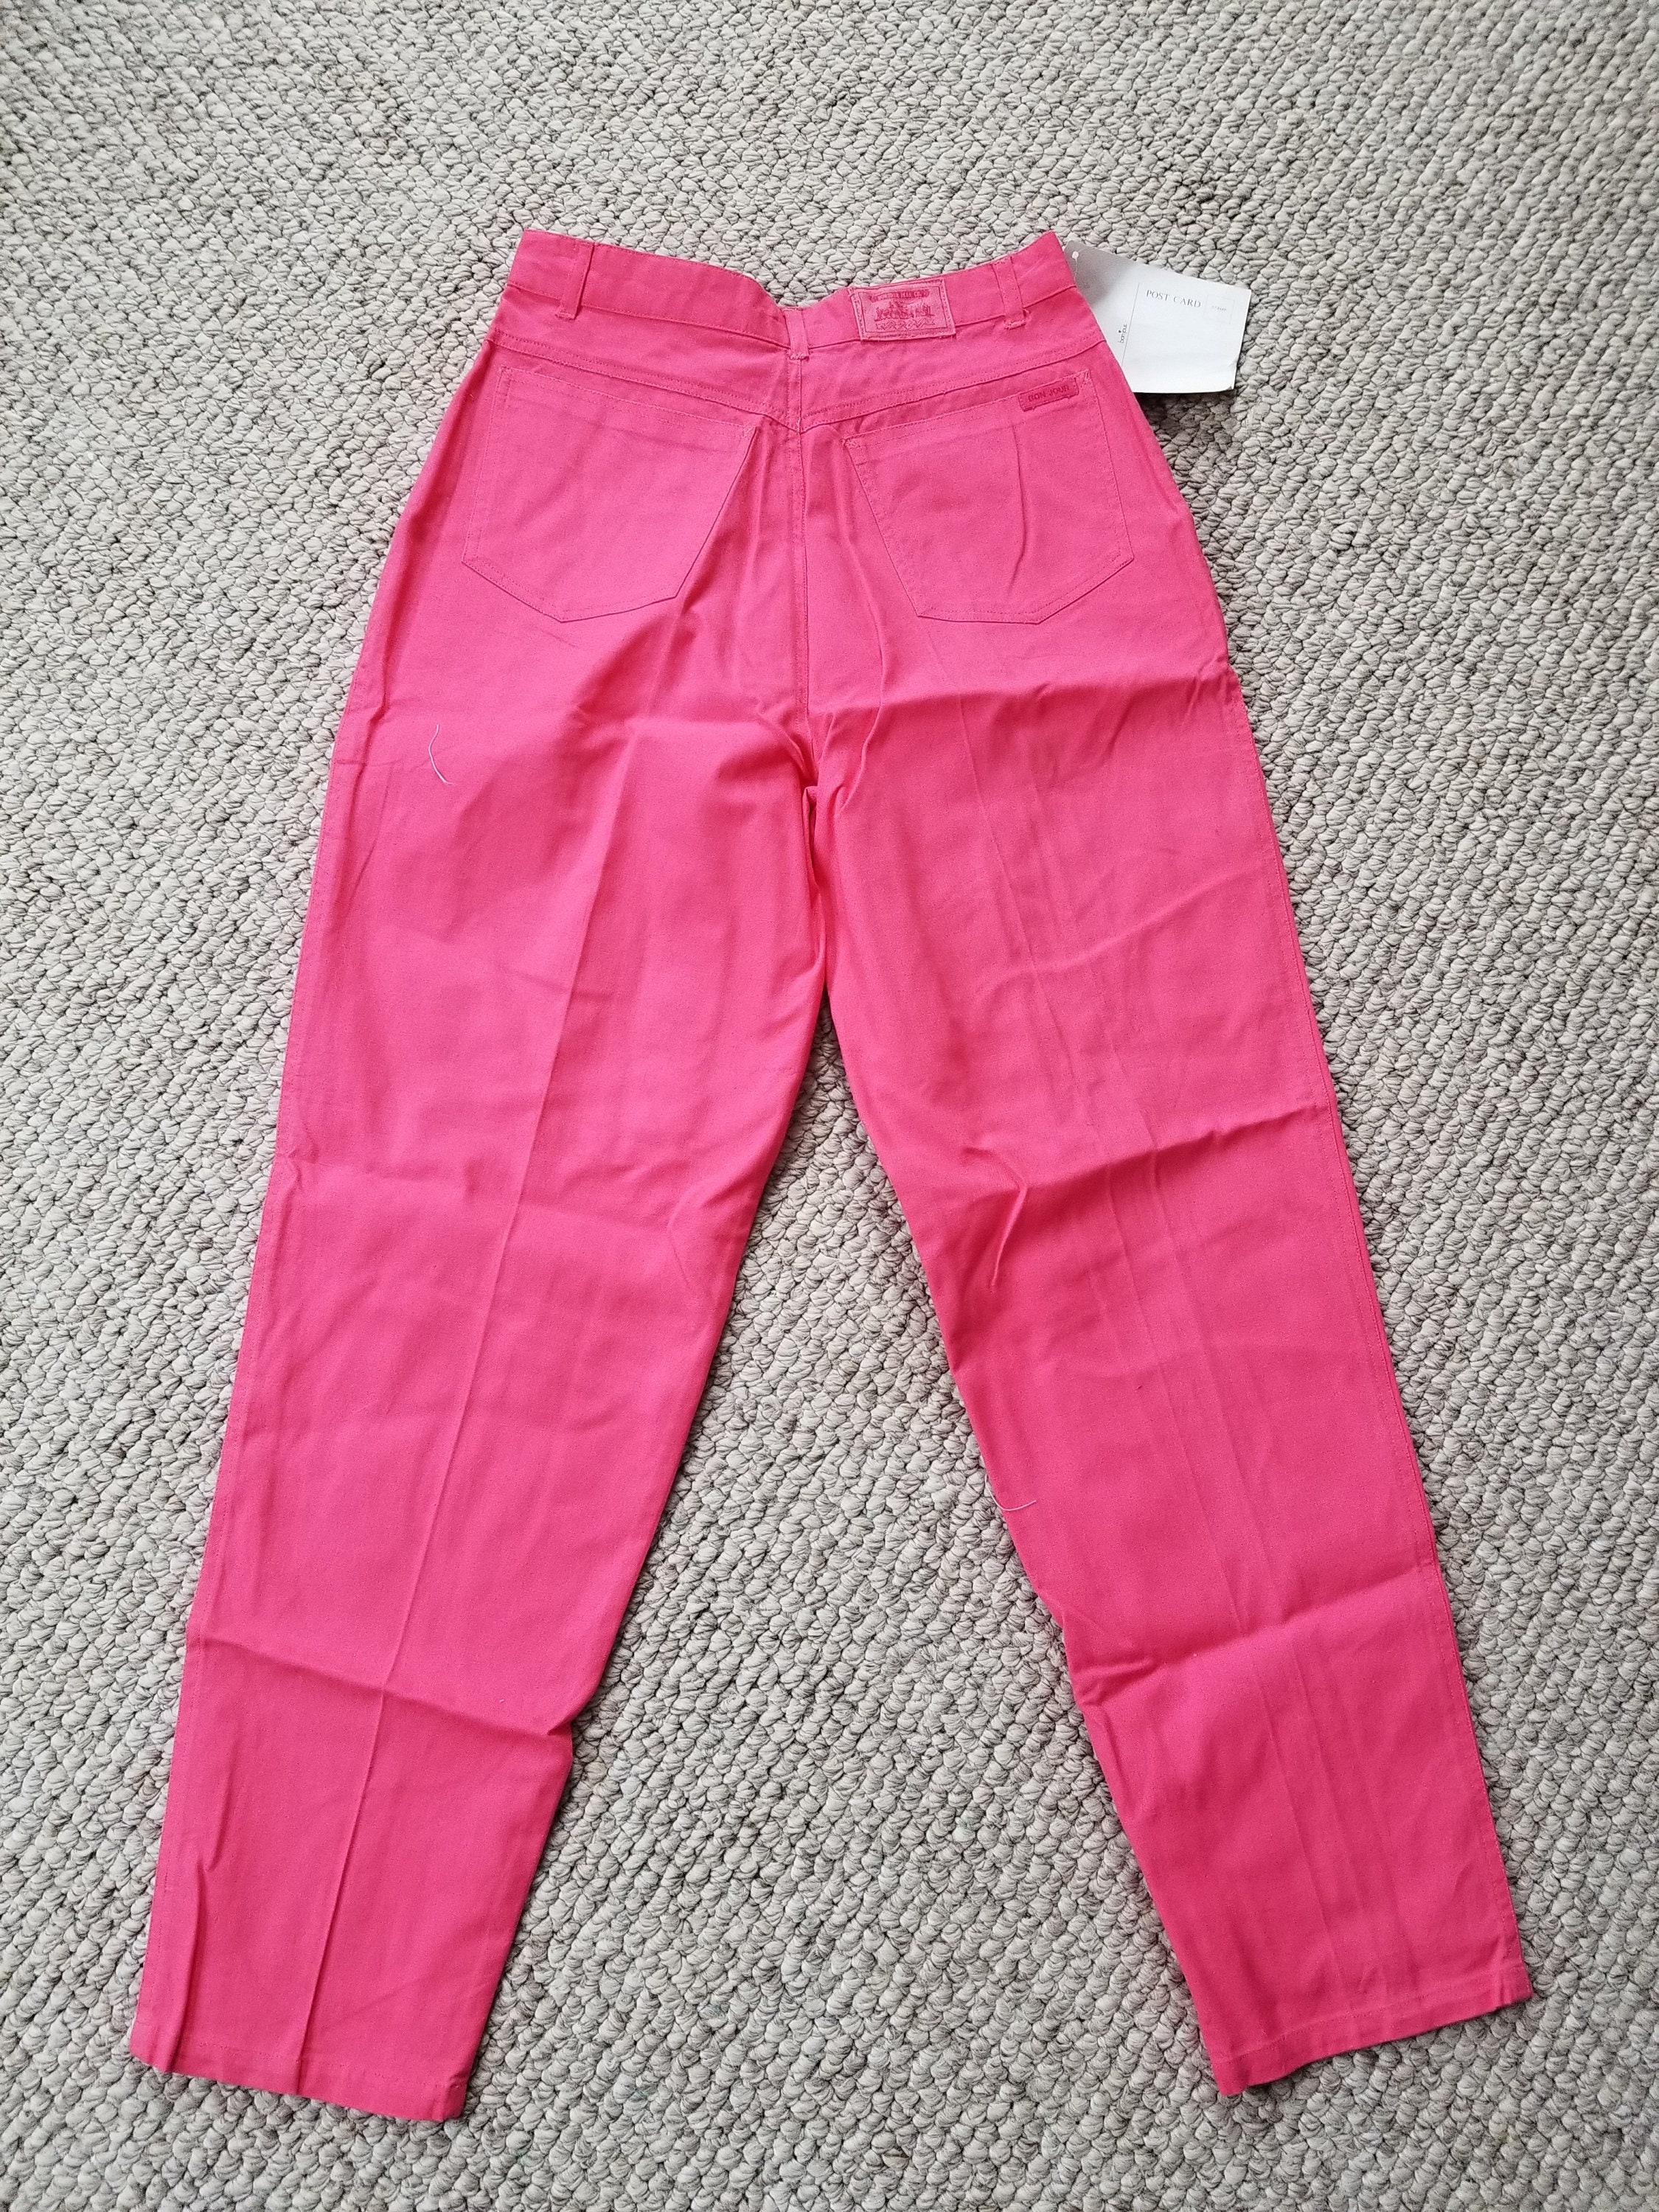 NEW 80s hot pink ladies pants tapered cuffs cotton high | Etsy